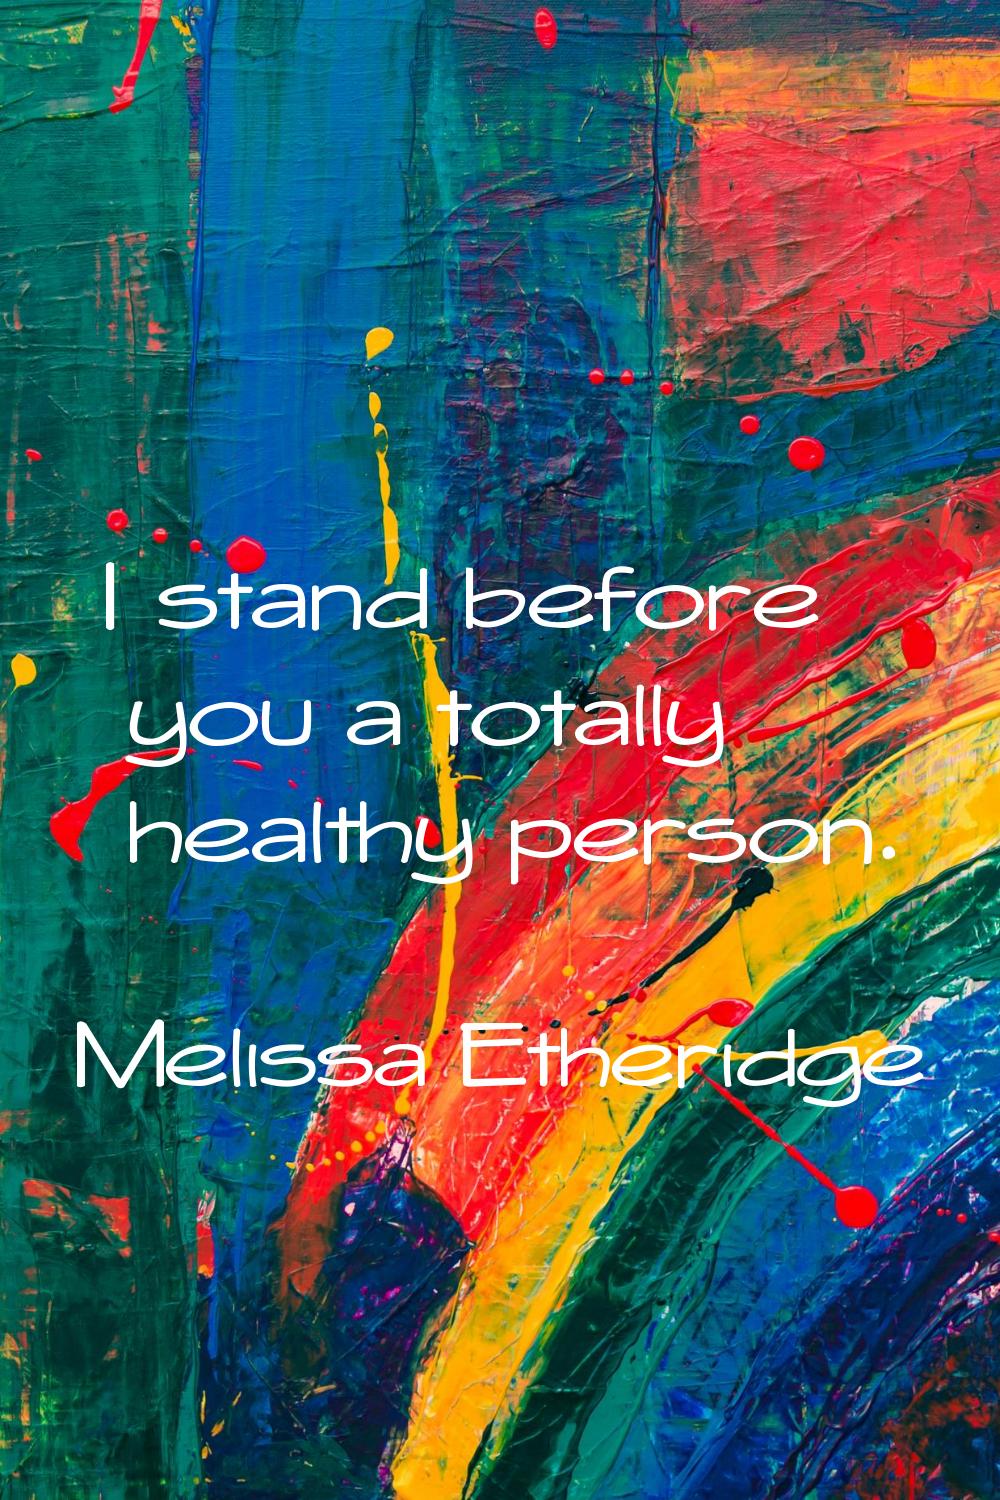 I stand before you a totally healthy person.